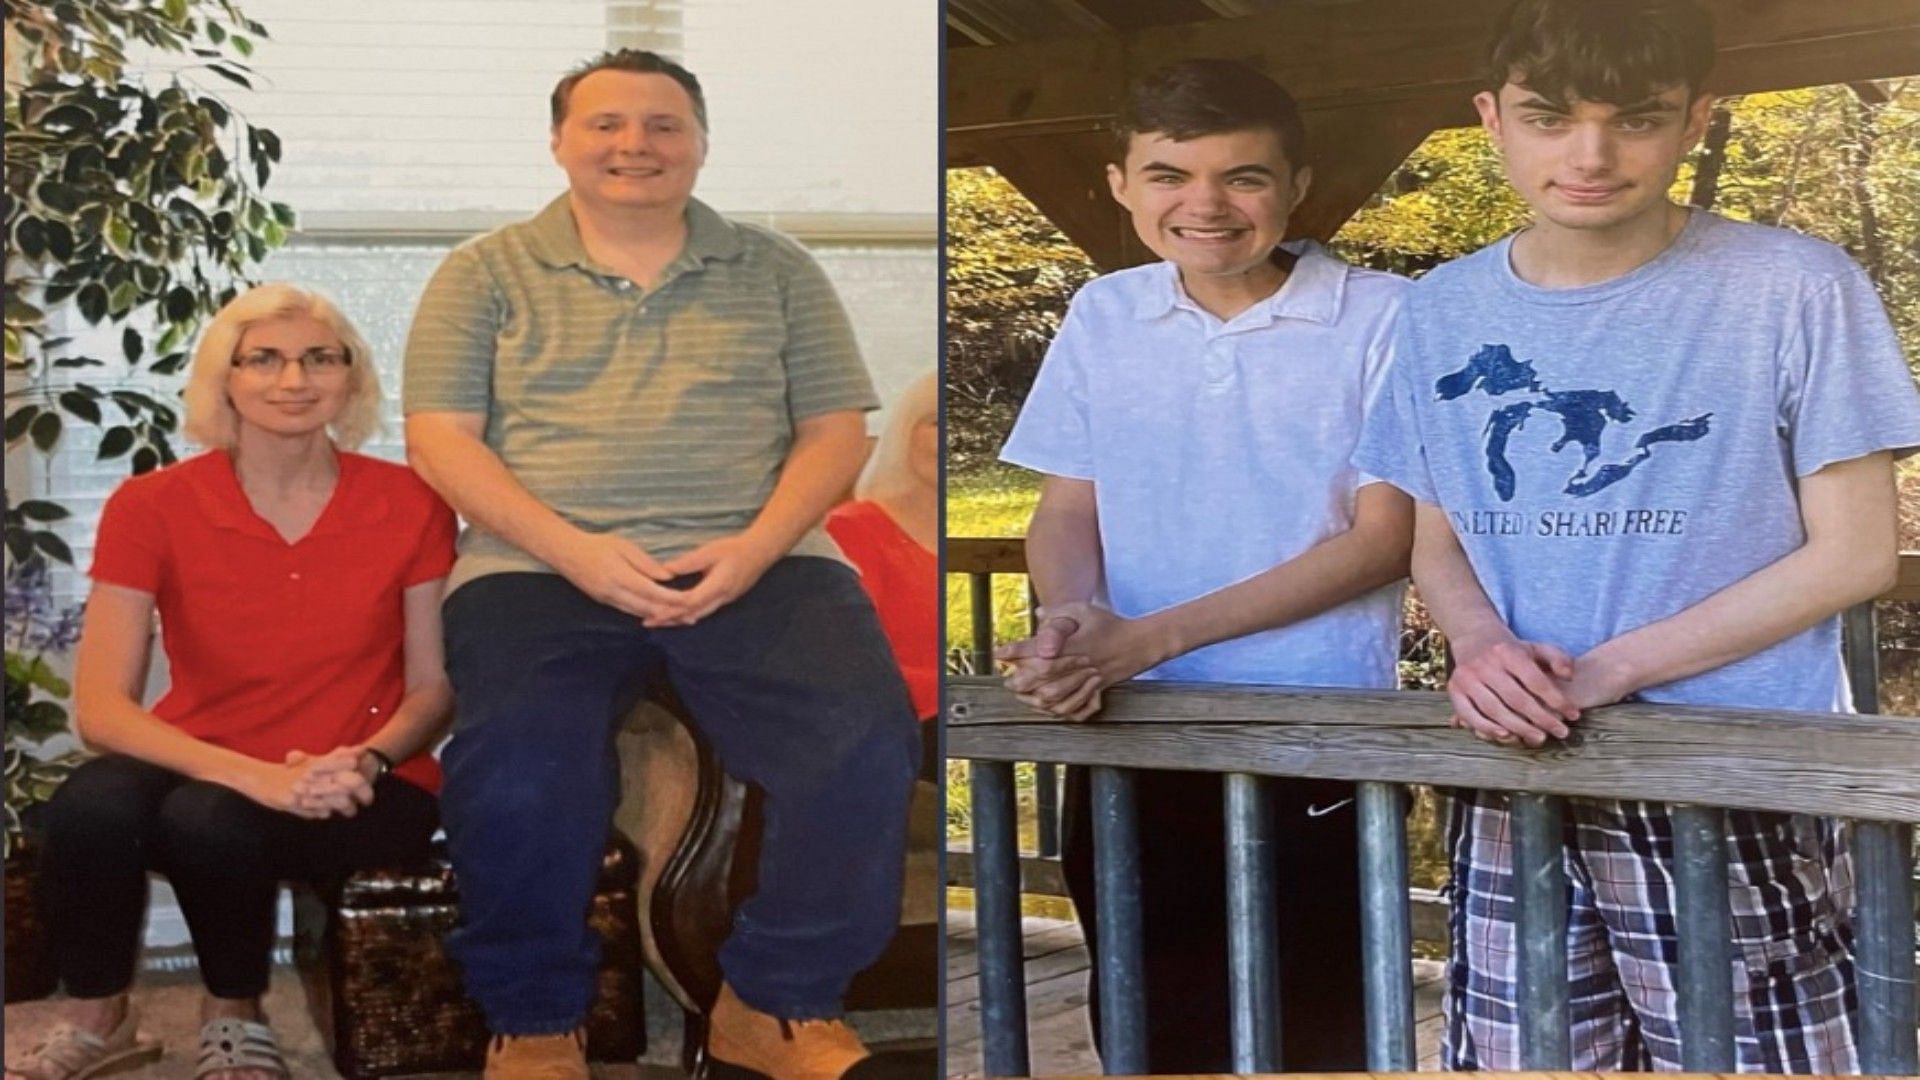  Michigan family of four reported missing since the weekend (Image via Facebook)